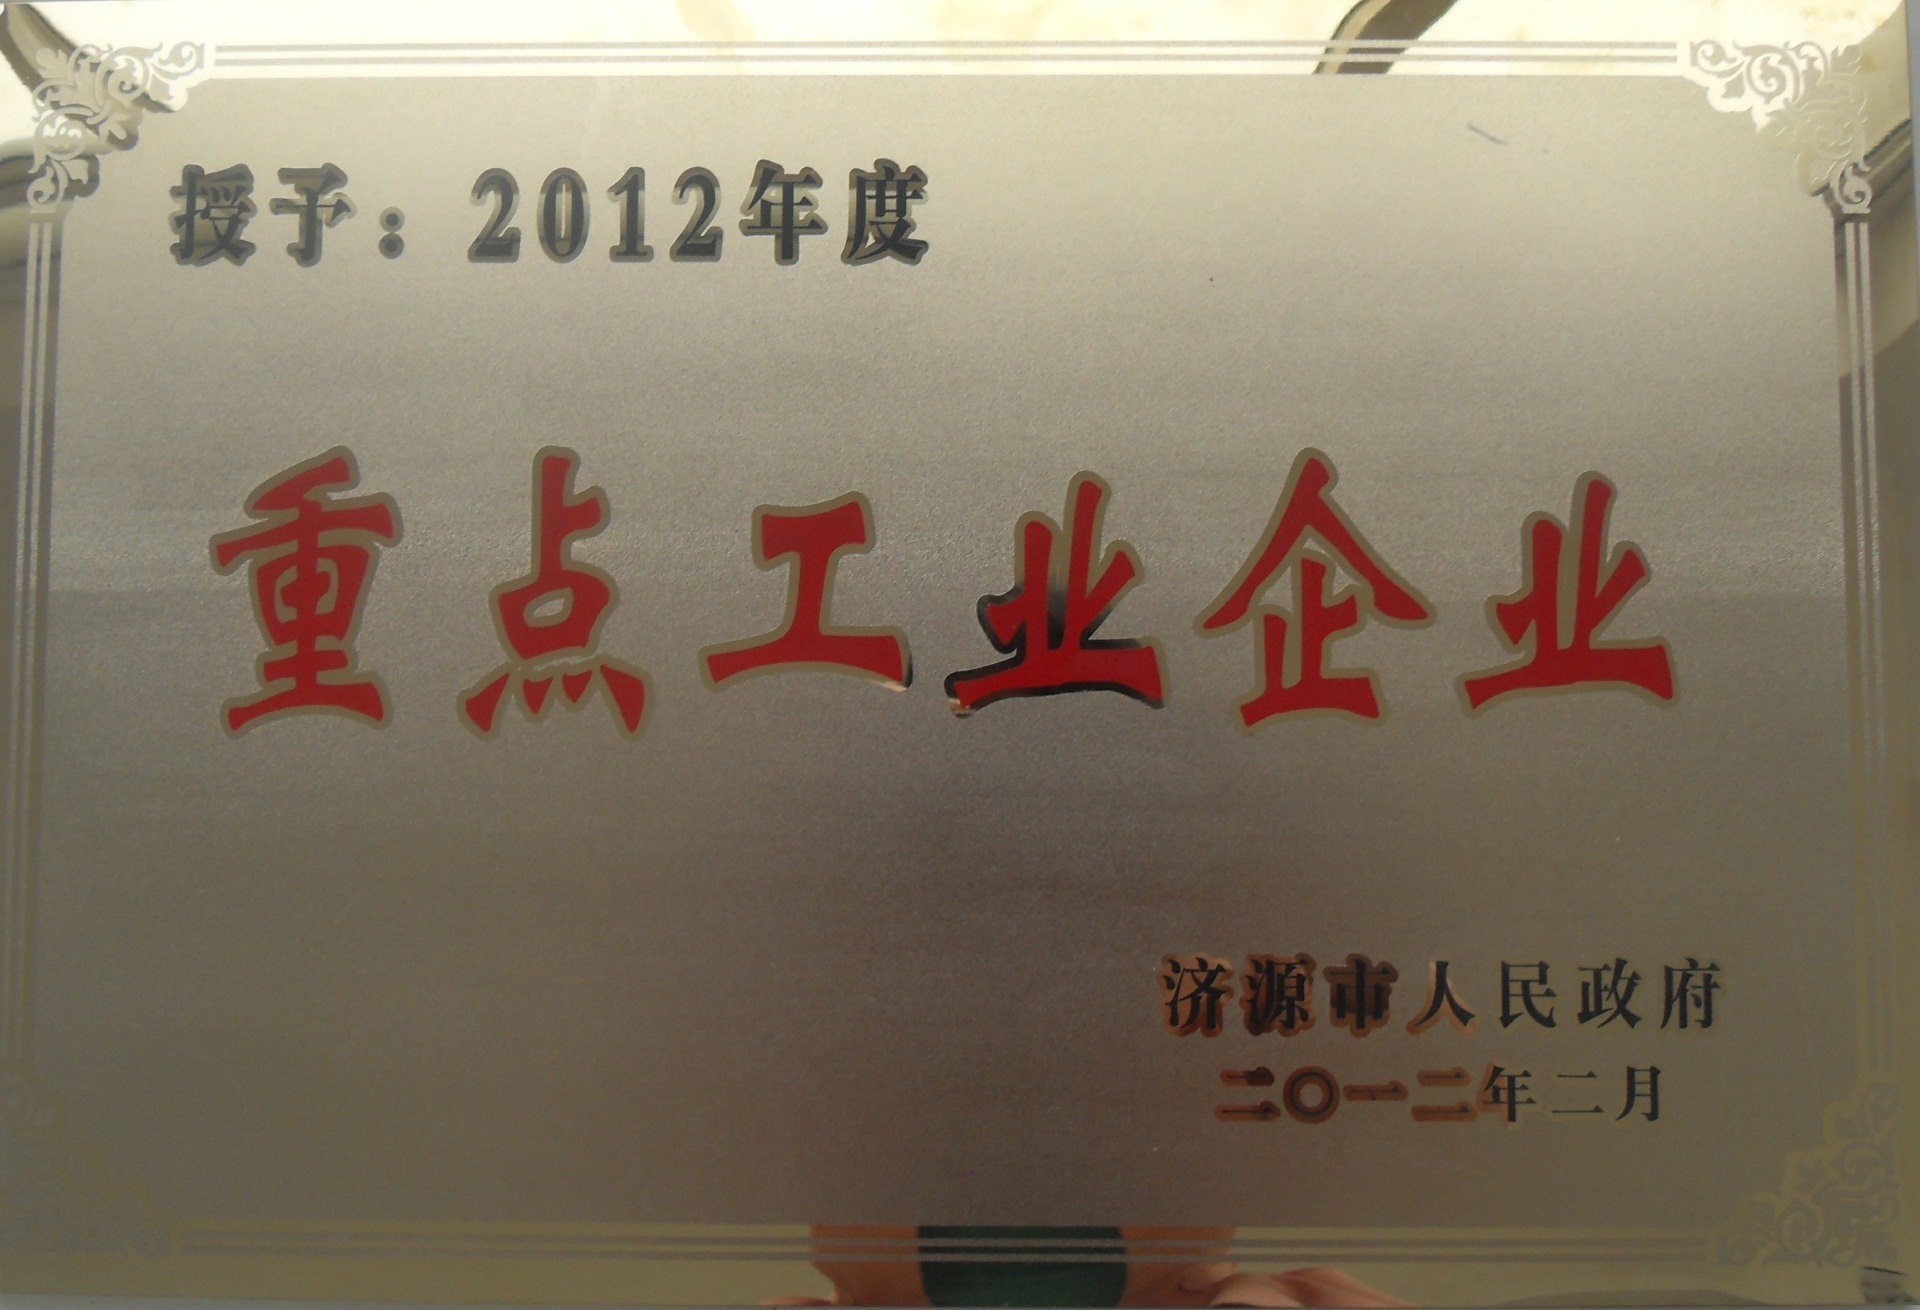 In 2012, our company was designated by the municipal government as one of the 30 key enterprises in Jiyuan City and the key service enterprise of the municipal government. 